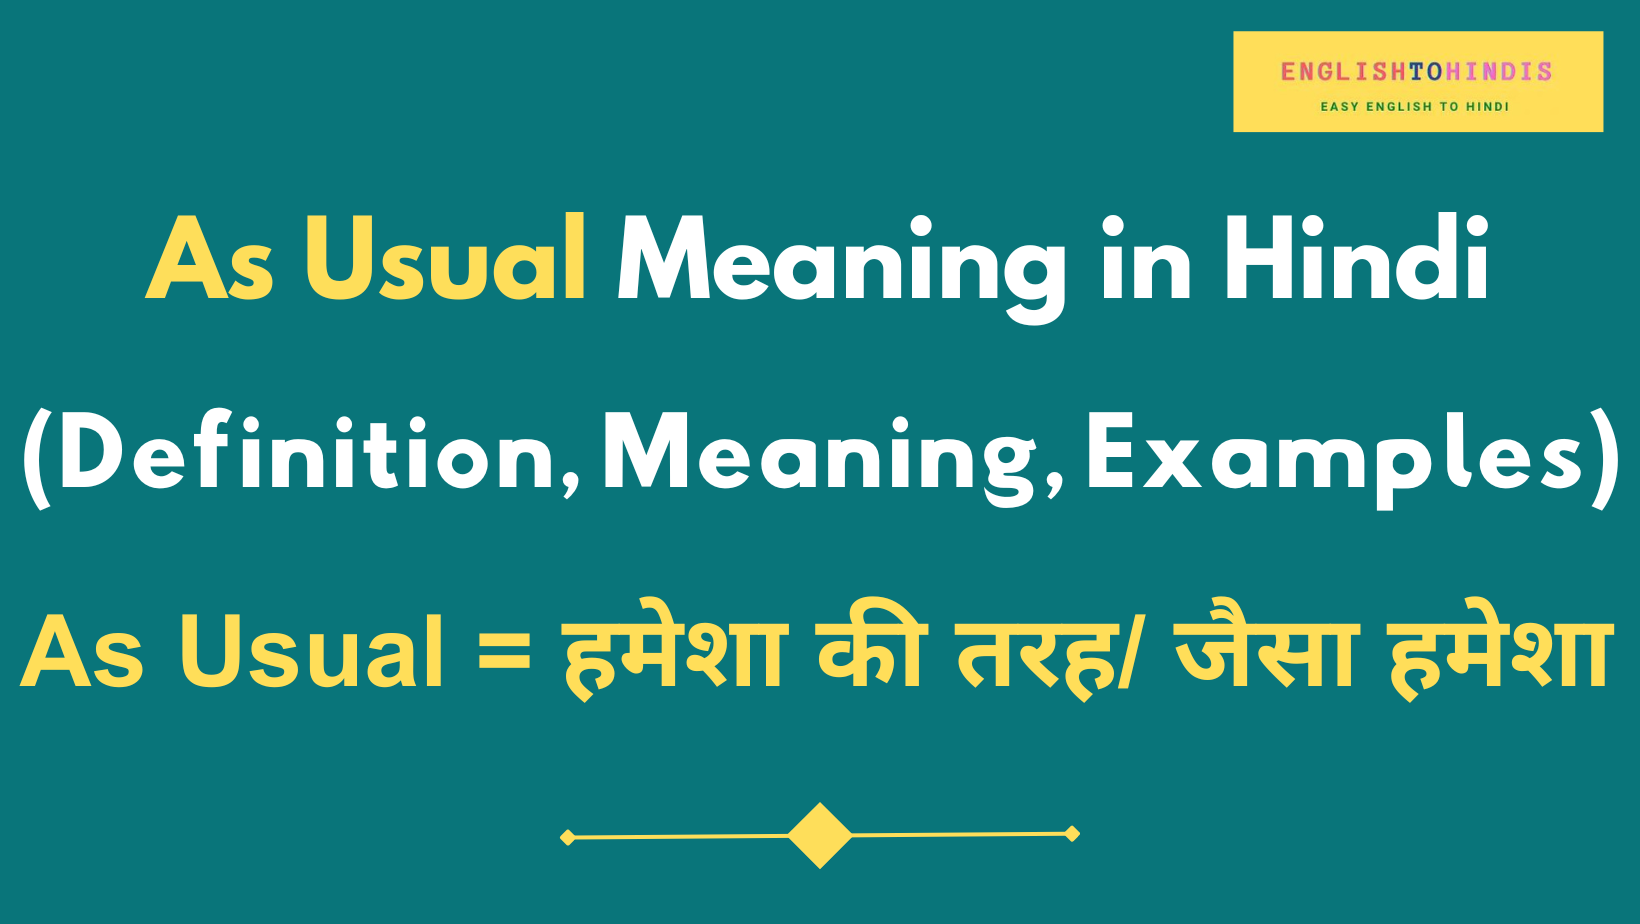 As Usual Meaning in Hindi